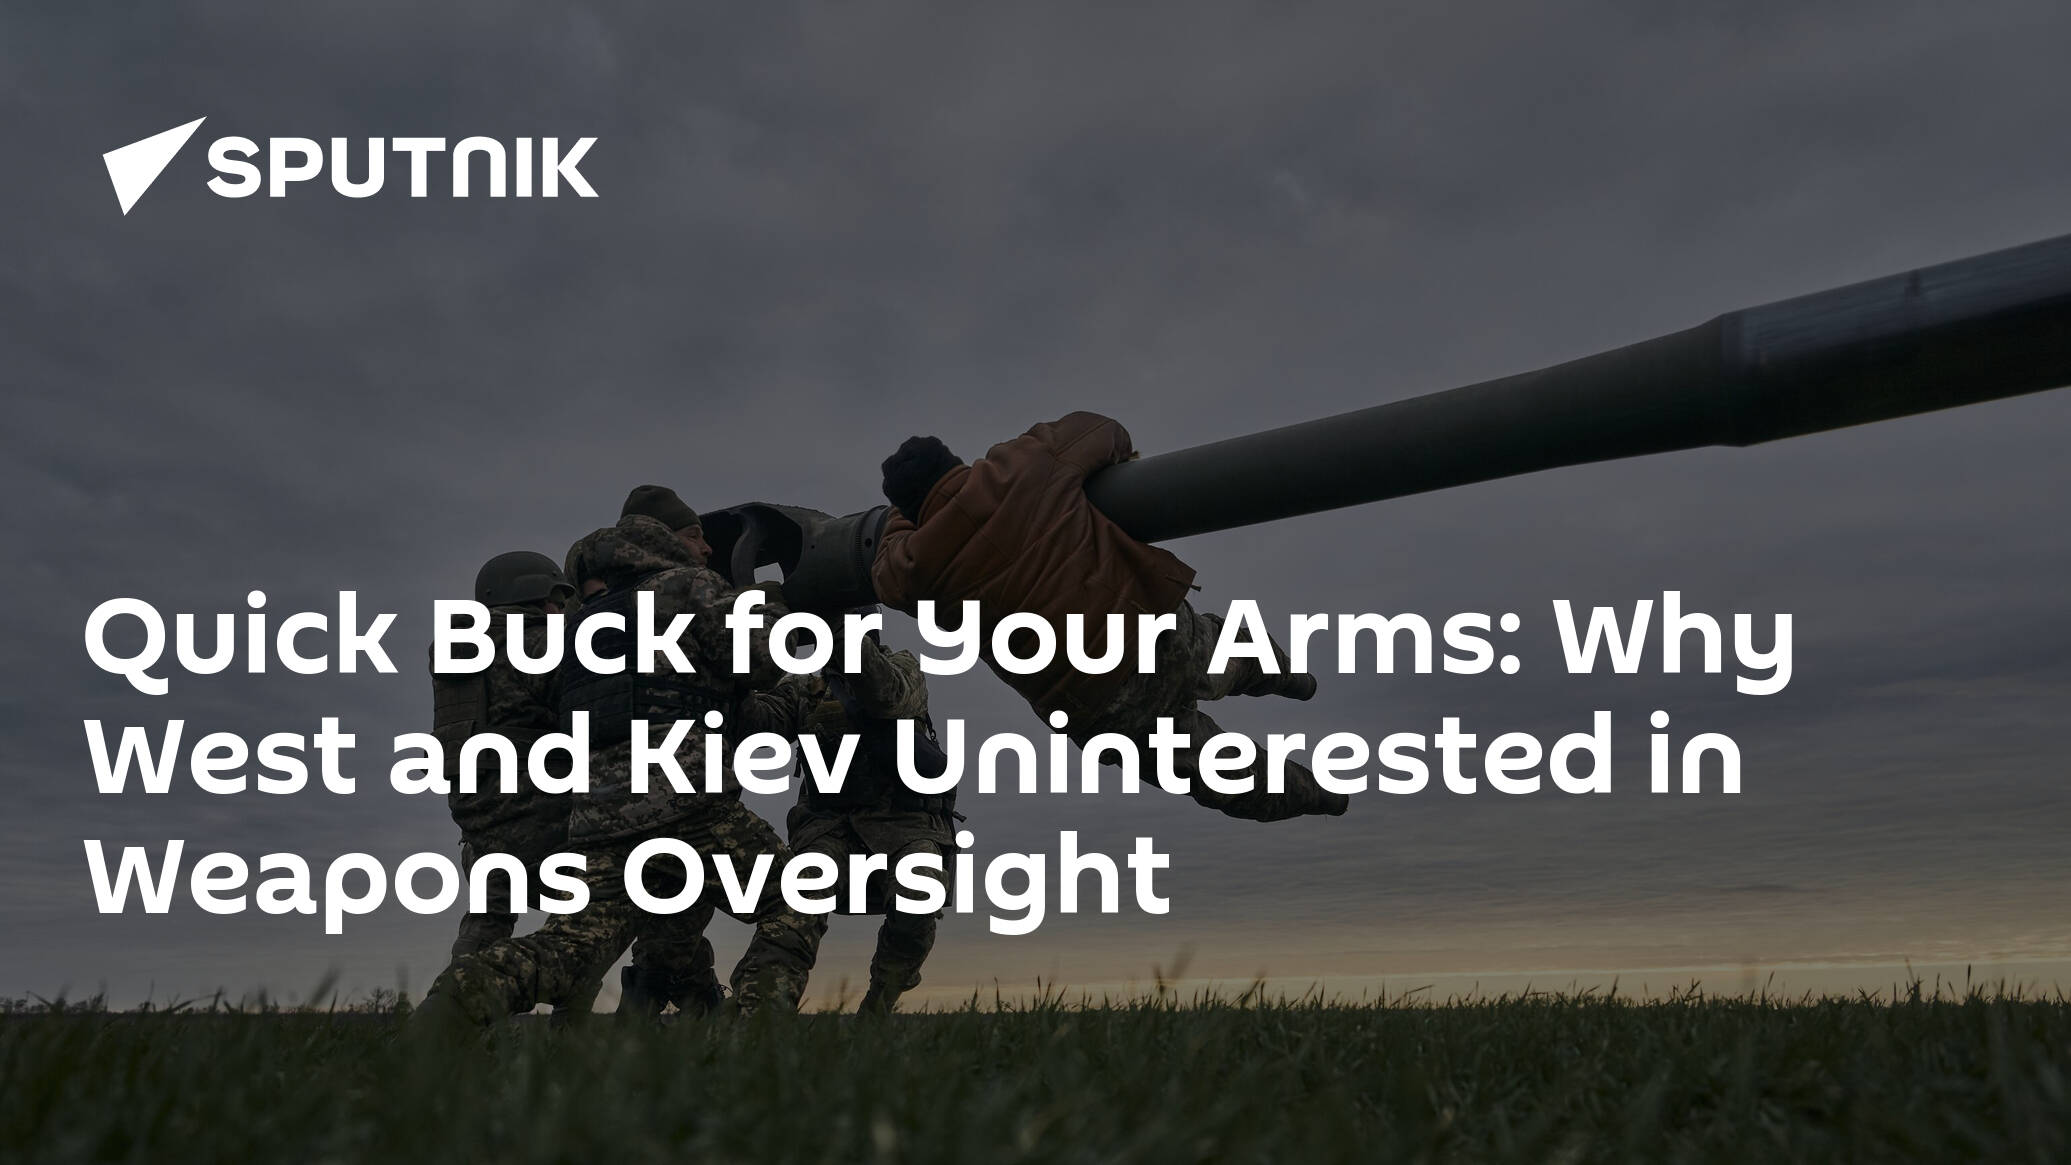 Quick Buck for Your Arms: Why West and Kiev Uninterested in Weapons Oversight